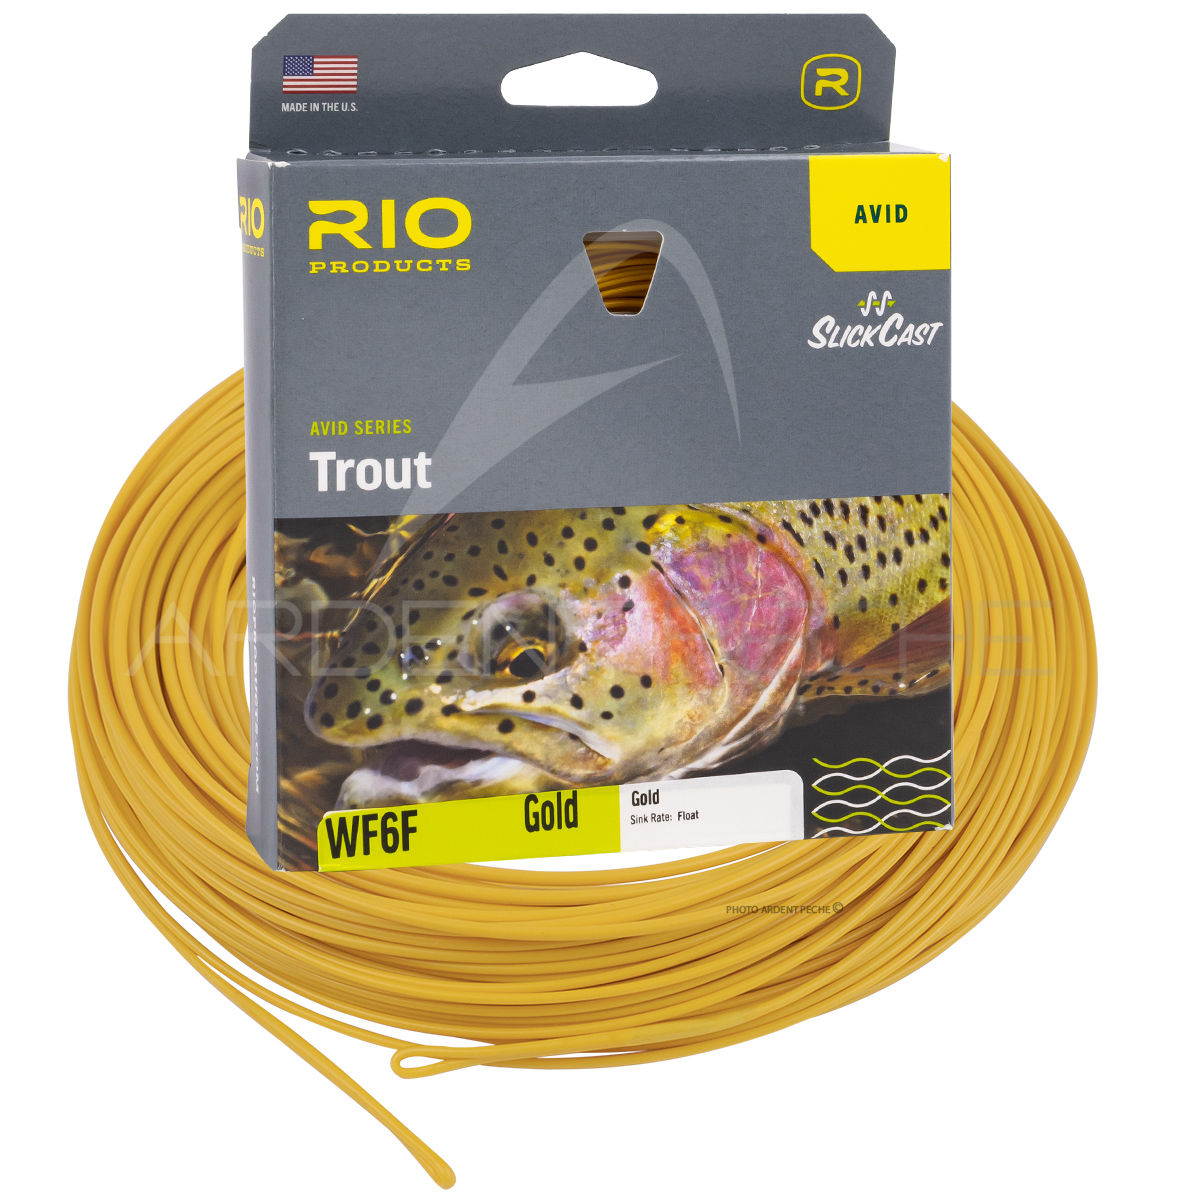 Rio Avid Trout Gold Fly Line - WF3F